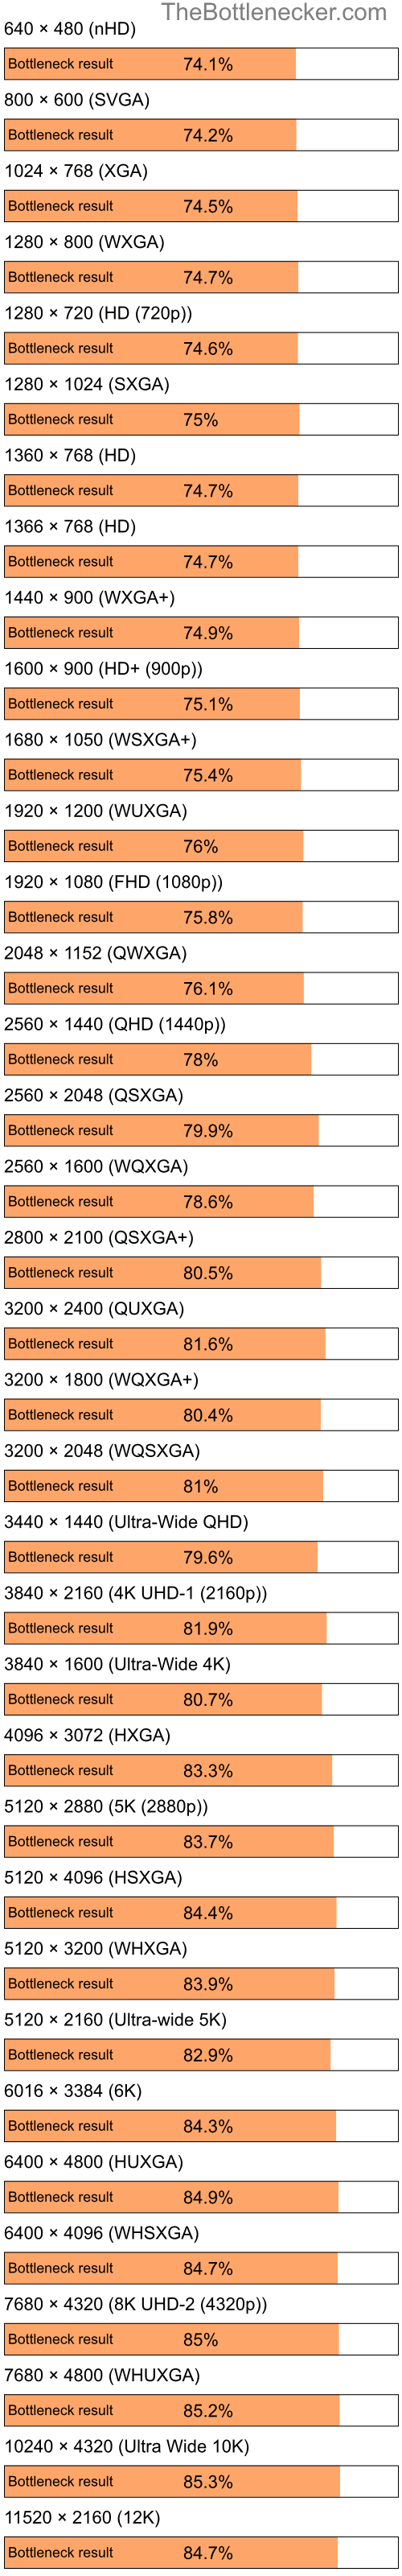 Bottleneck results by resolution for Intel Atom Z520 and AMD Radeon X800 PRO in Graphic Card Intense Tasks